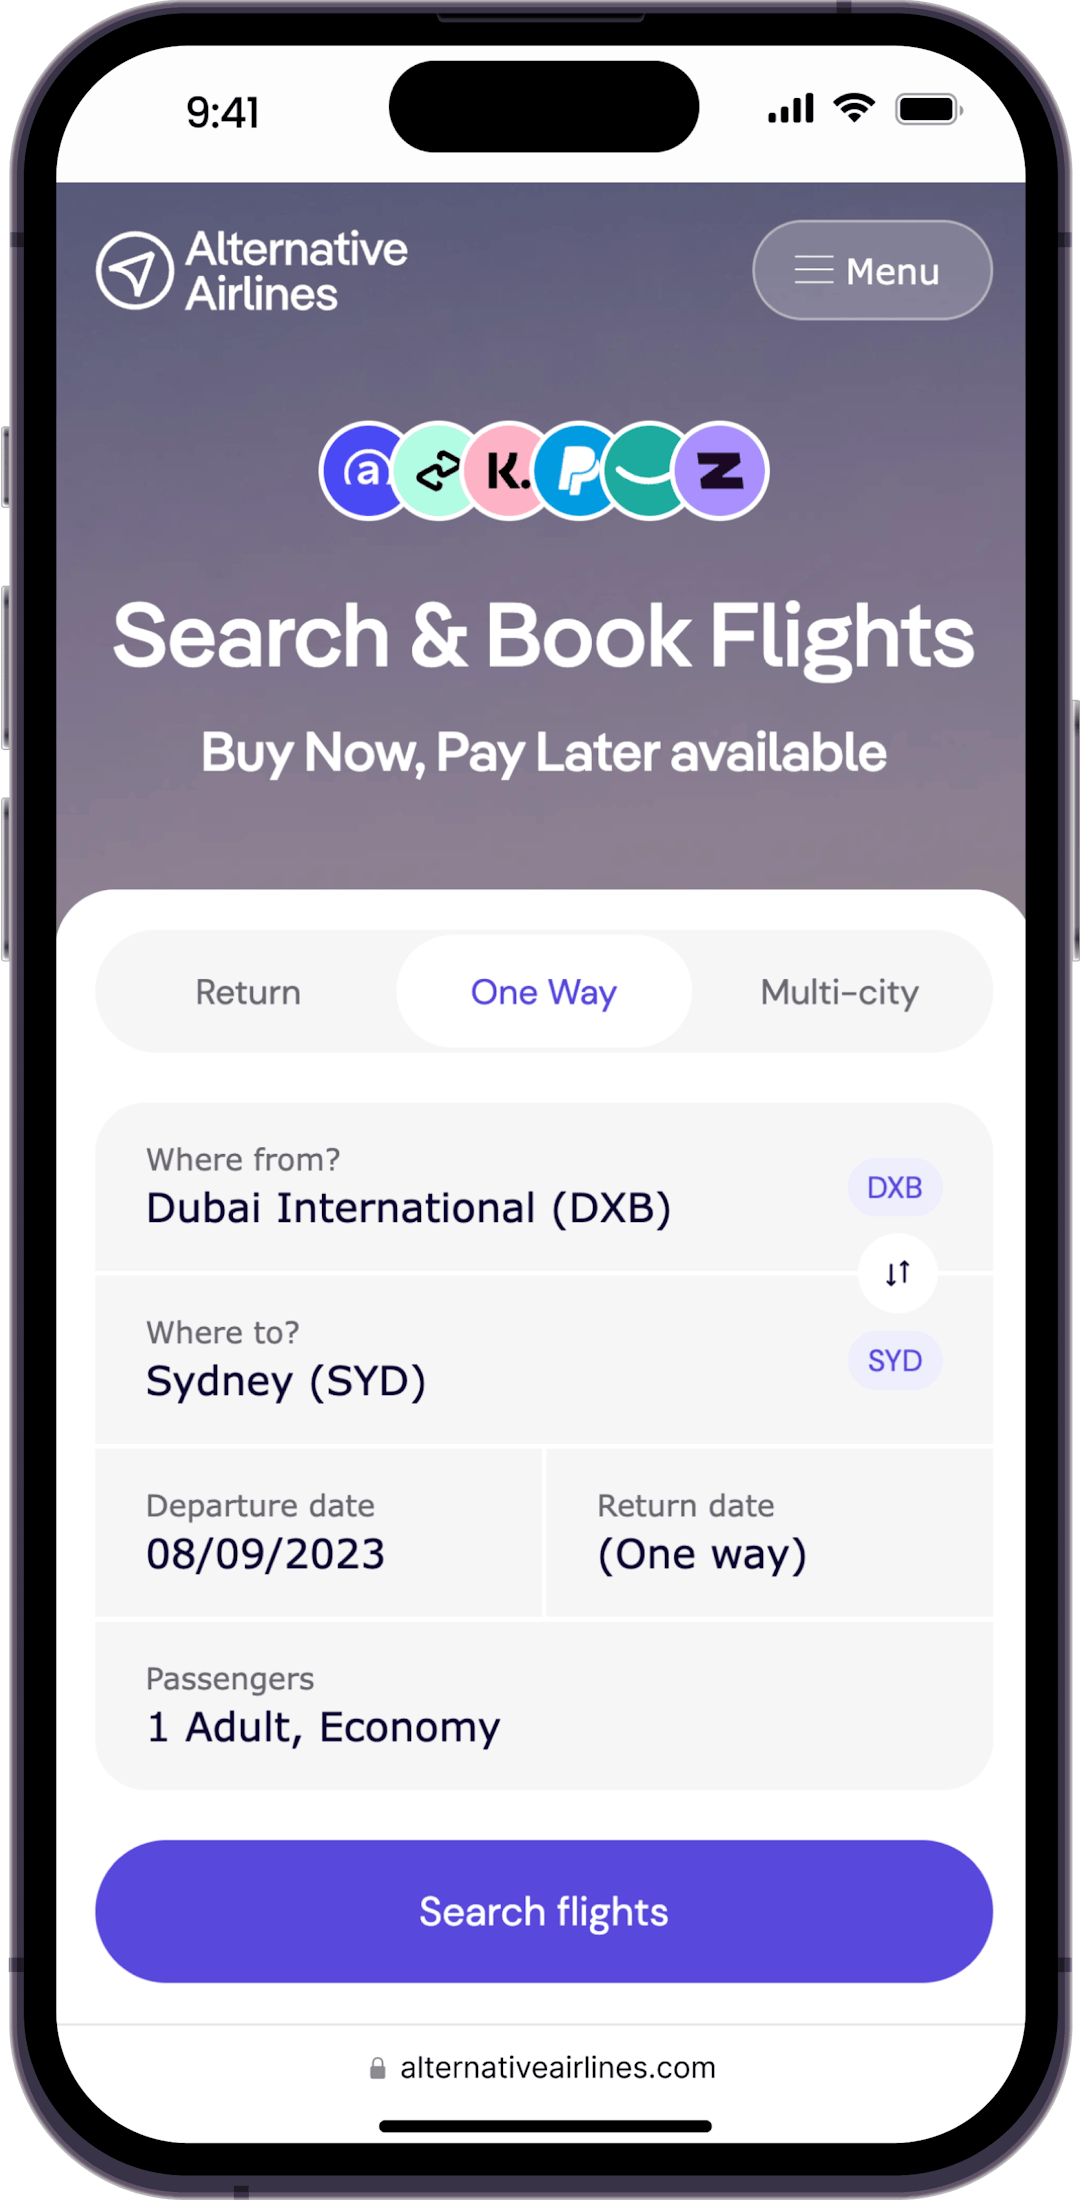 Step 1 - Search for Flights to Australia